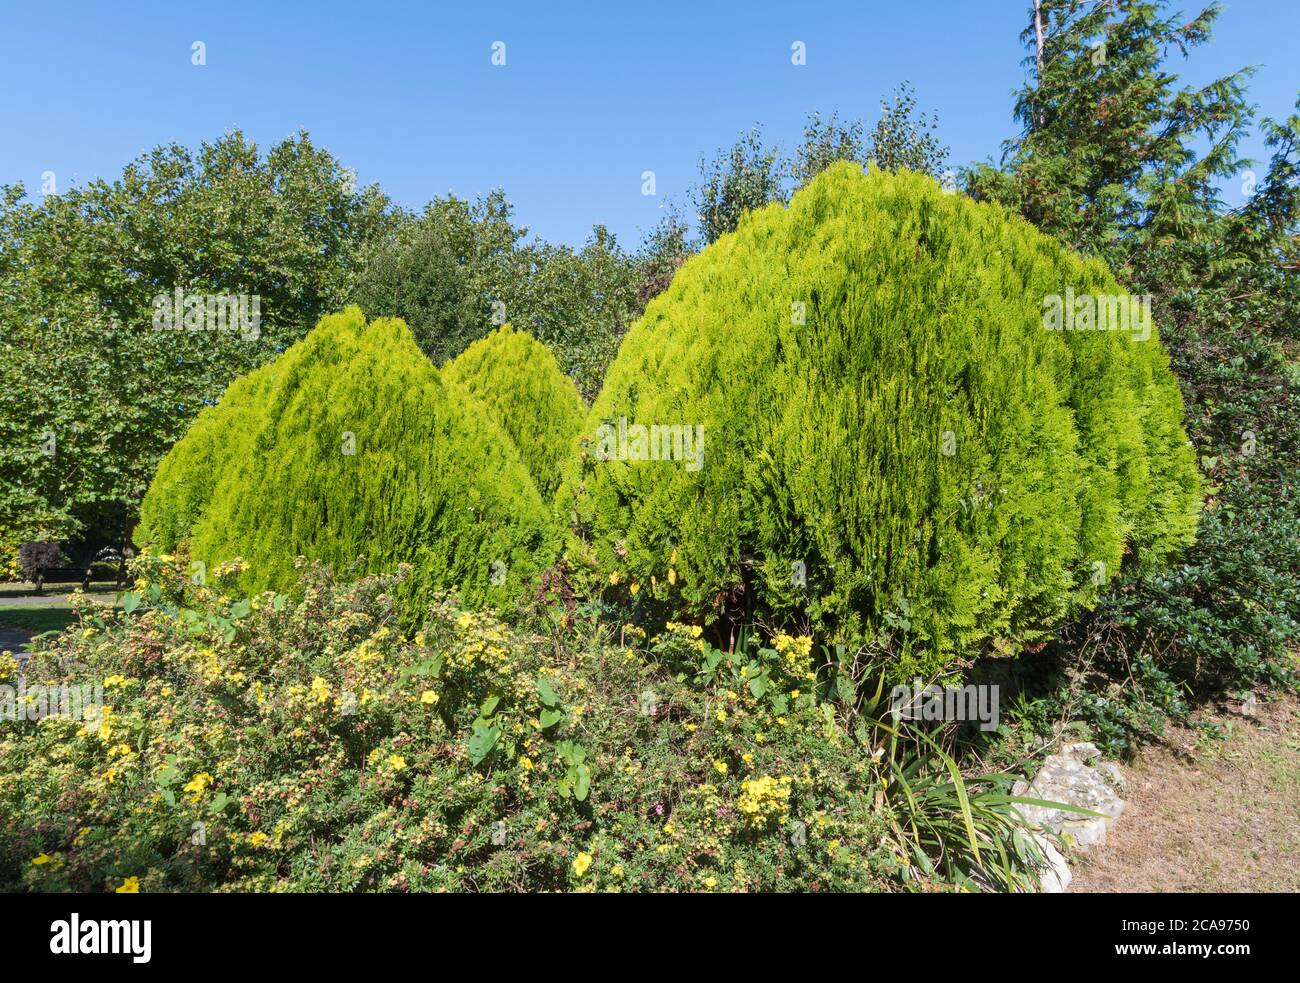 Neatly trimmed bushes in a park. Bush after neat and tidy trimming. Stock Photo